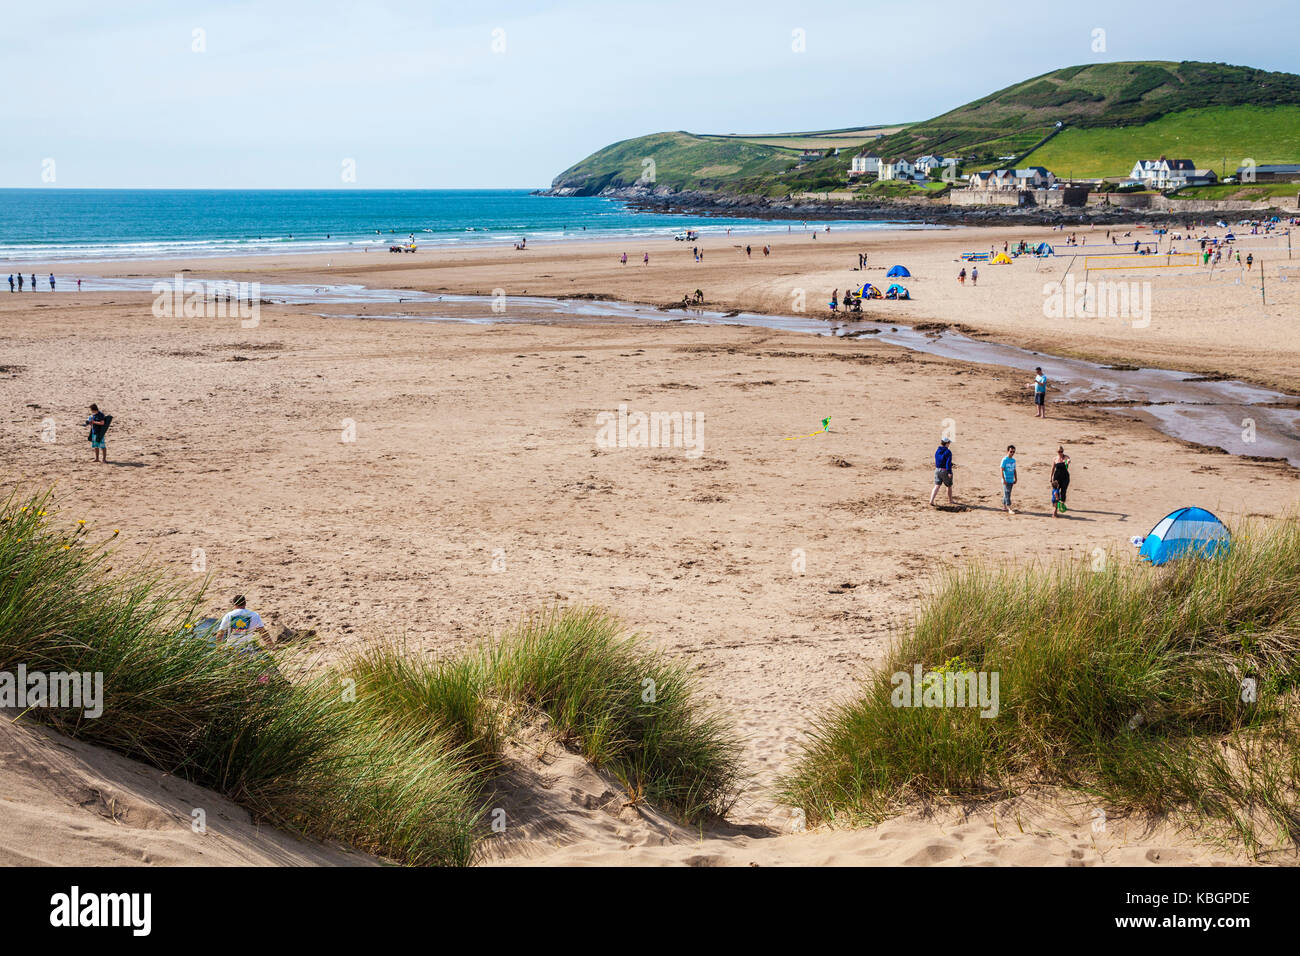 The sandy beach at Croyde in Devon during the summer holiday season. Stock Photo